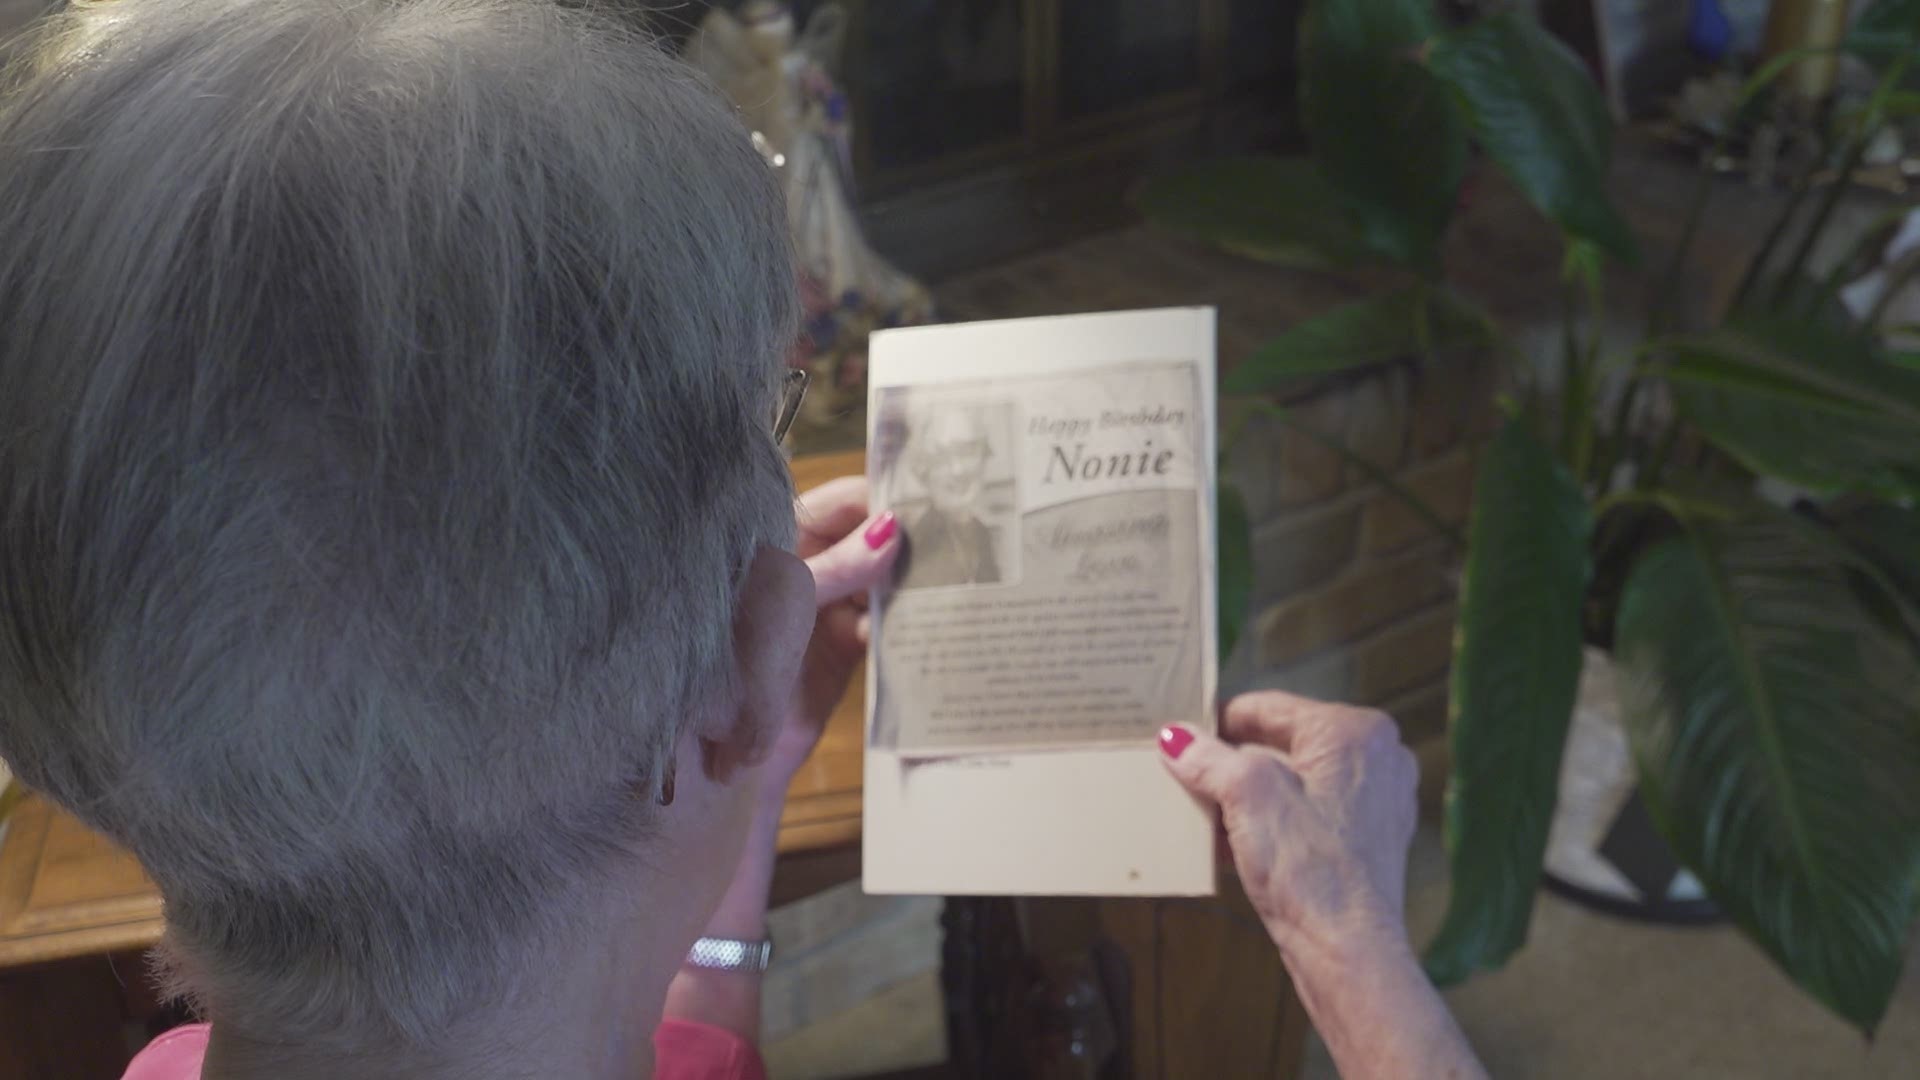 Meet a local woman who lost her soulmate after 58 years of marriage. Our Camille Requiestas tells Jo Ann and Ray Boulter’s love story.